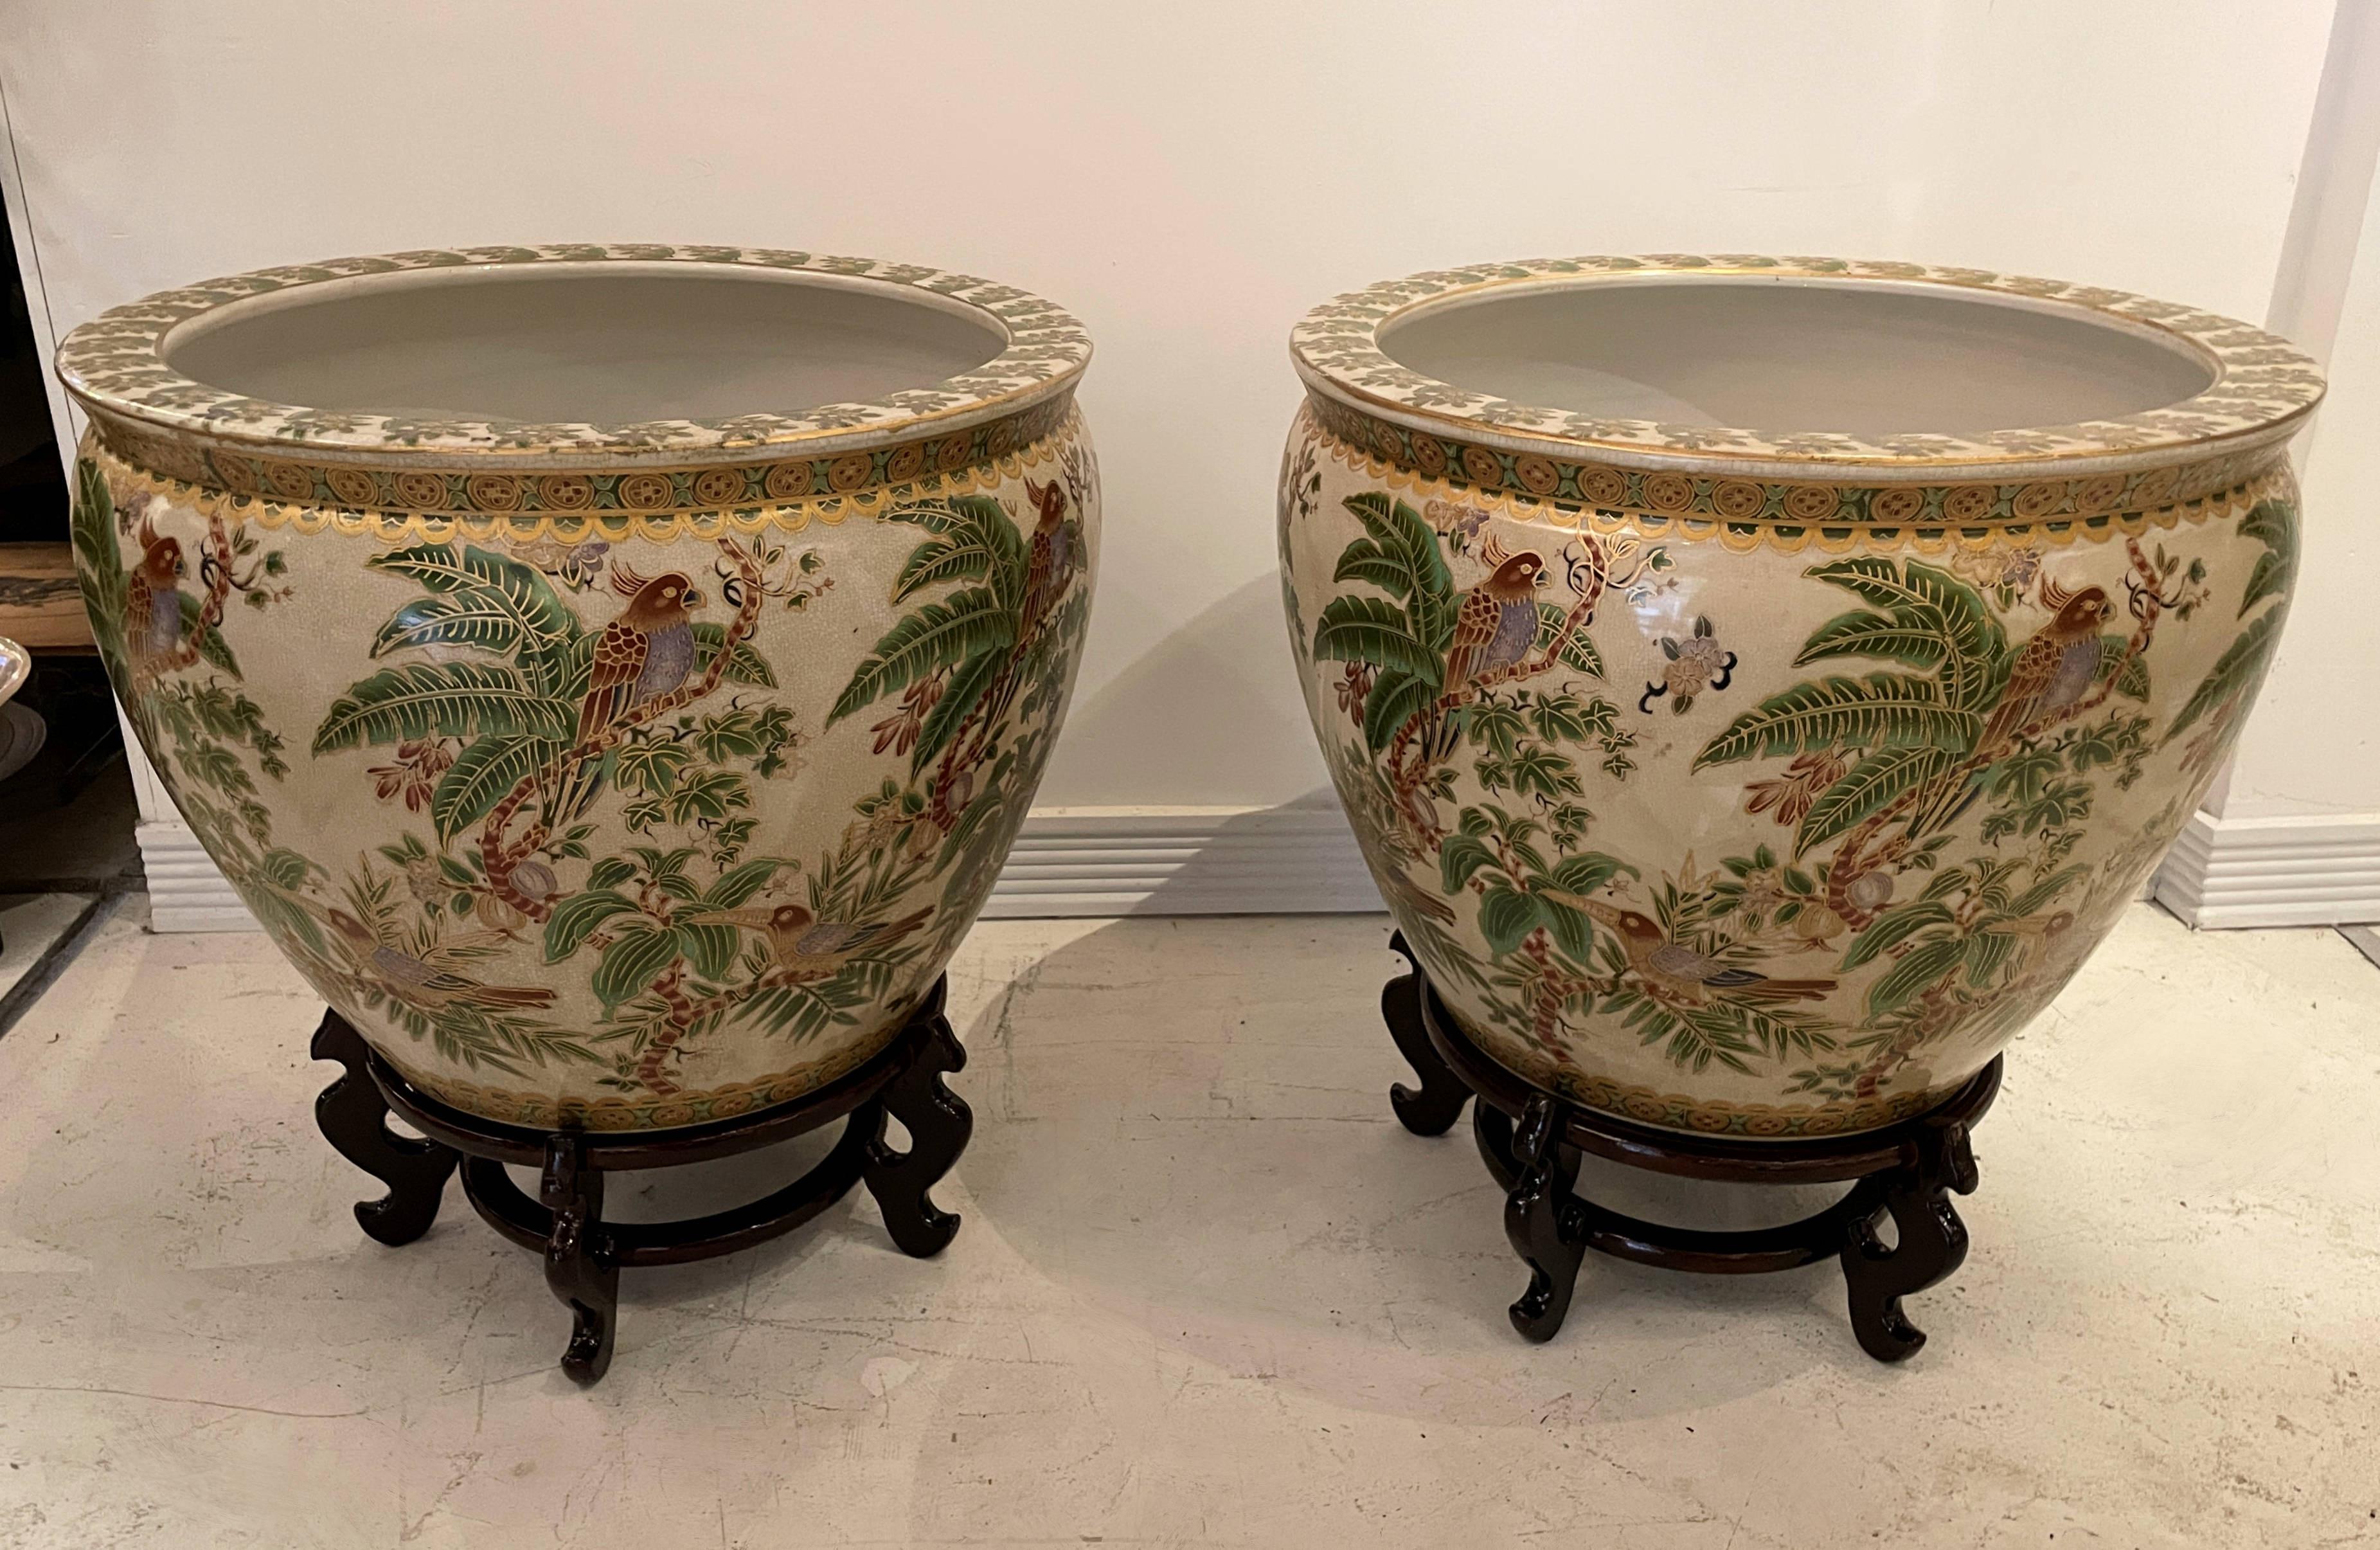 Vivid tropical scenes are hand painted on a pair of Chinese porcelain fishbowl planters with matching wood stands. The interior is delightfully painted with coy fish. The pair are in very good condition.